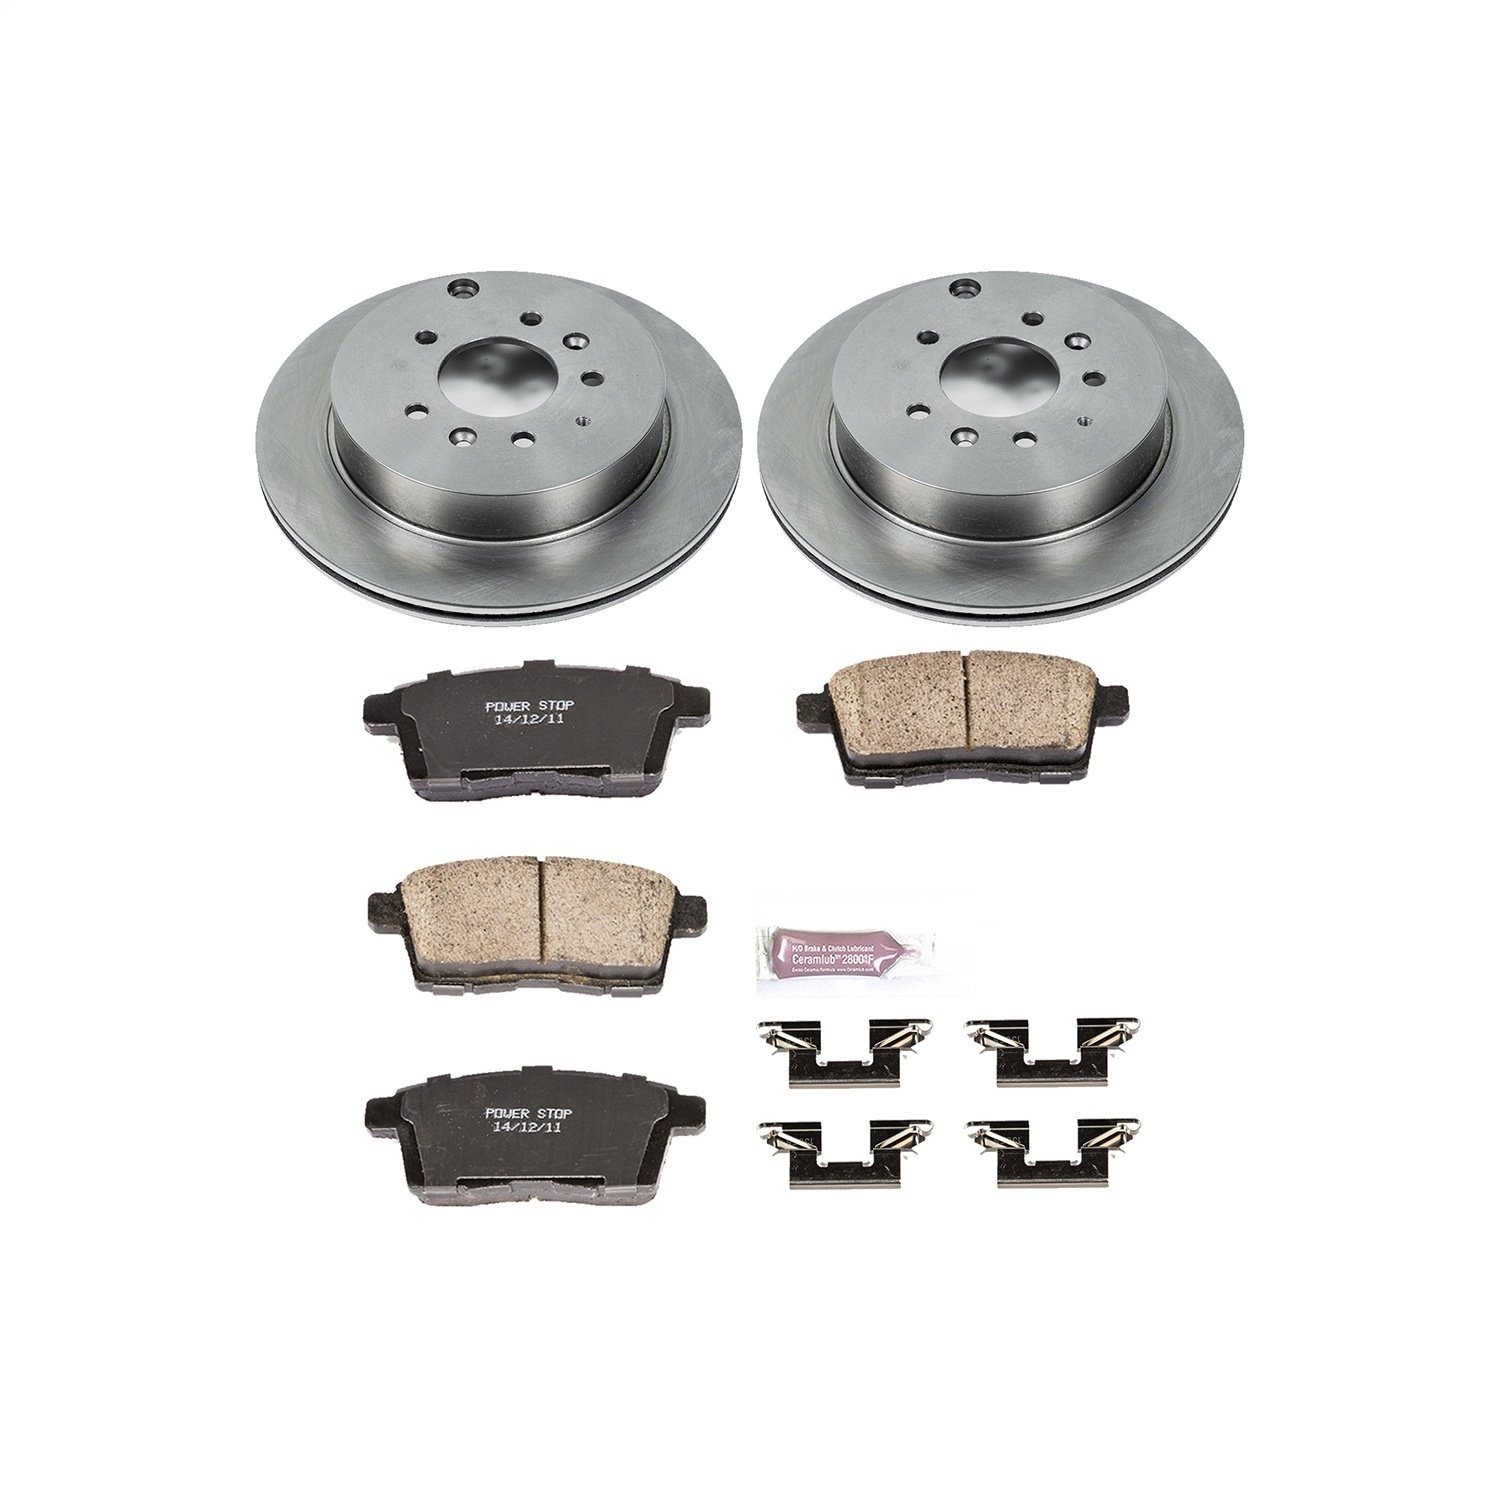 1-Click Daily Driver Brake Kits Rear OE Replacement Rotors Z16 Ceramic Scorched Brake Pads